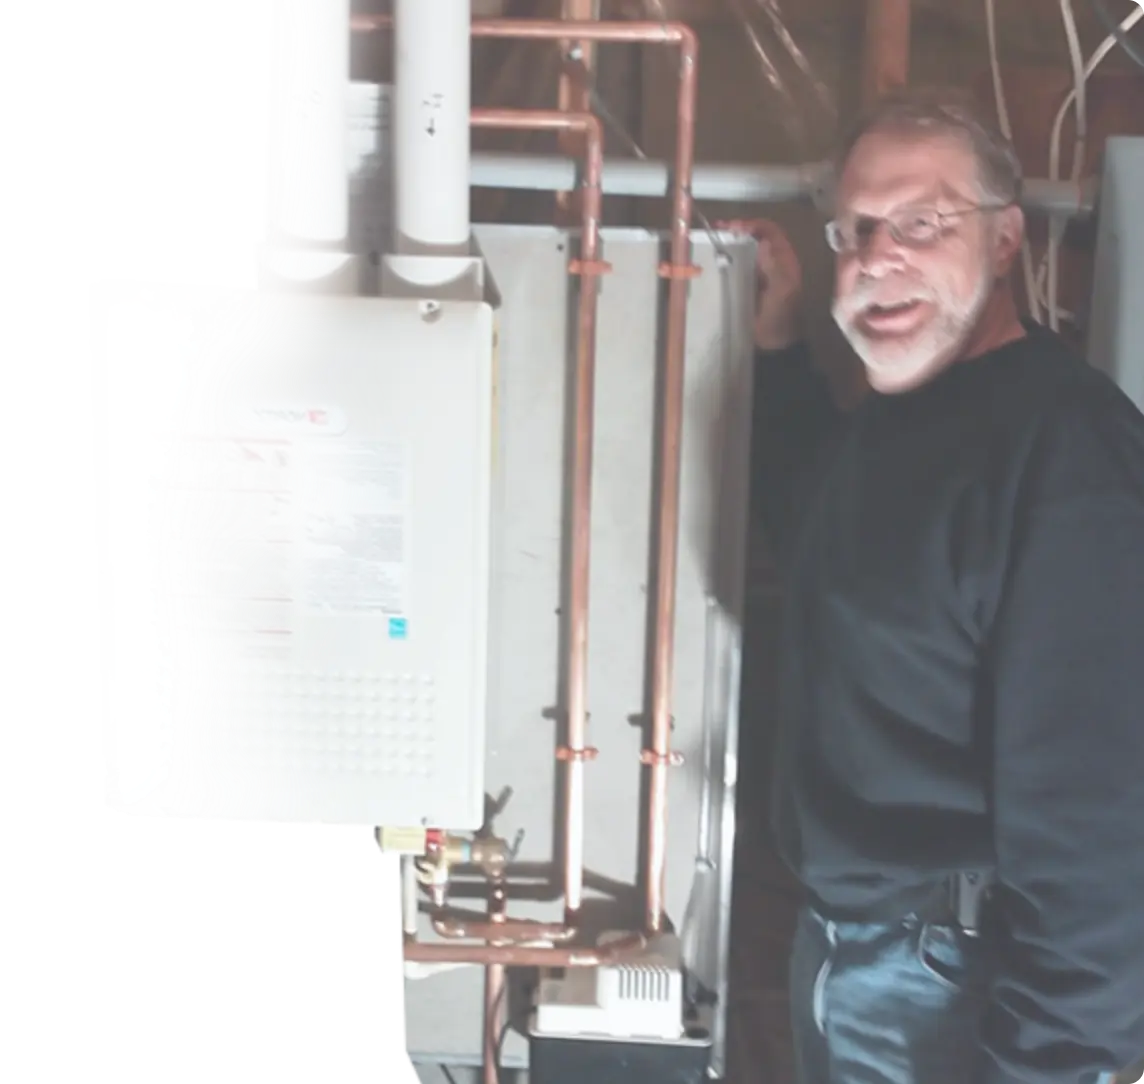 image of a man standing next to a water heater